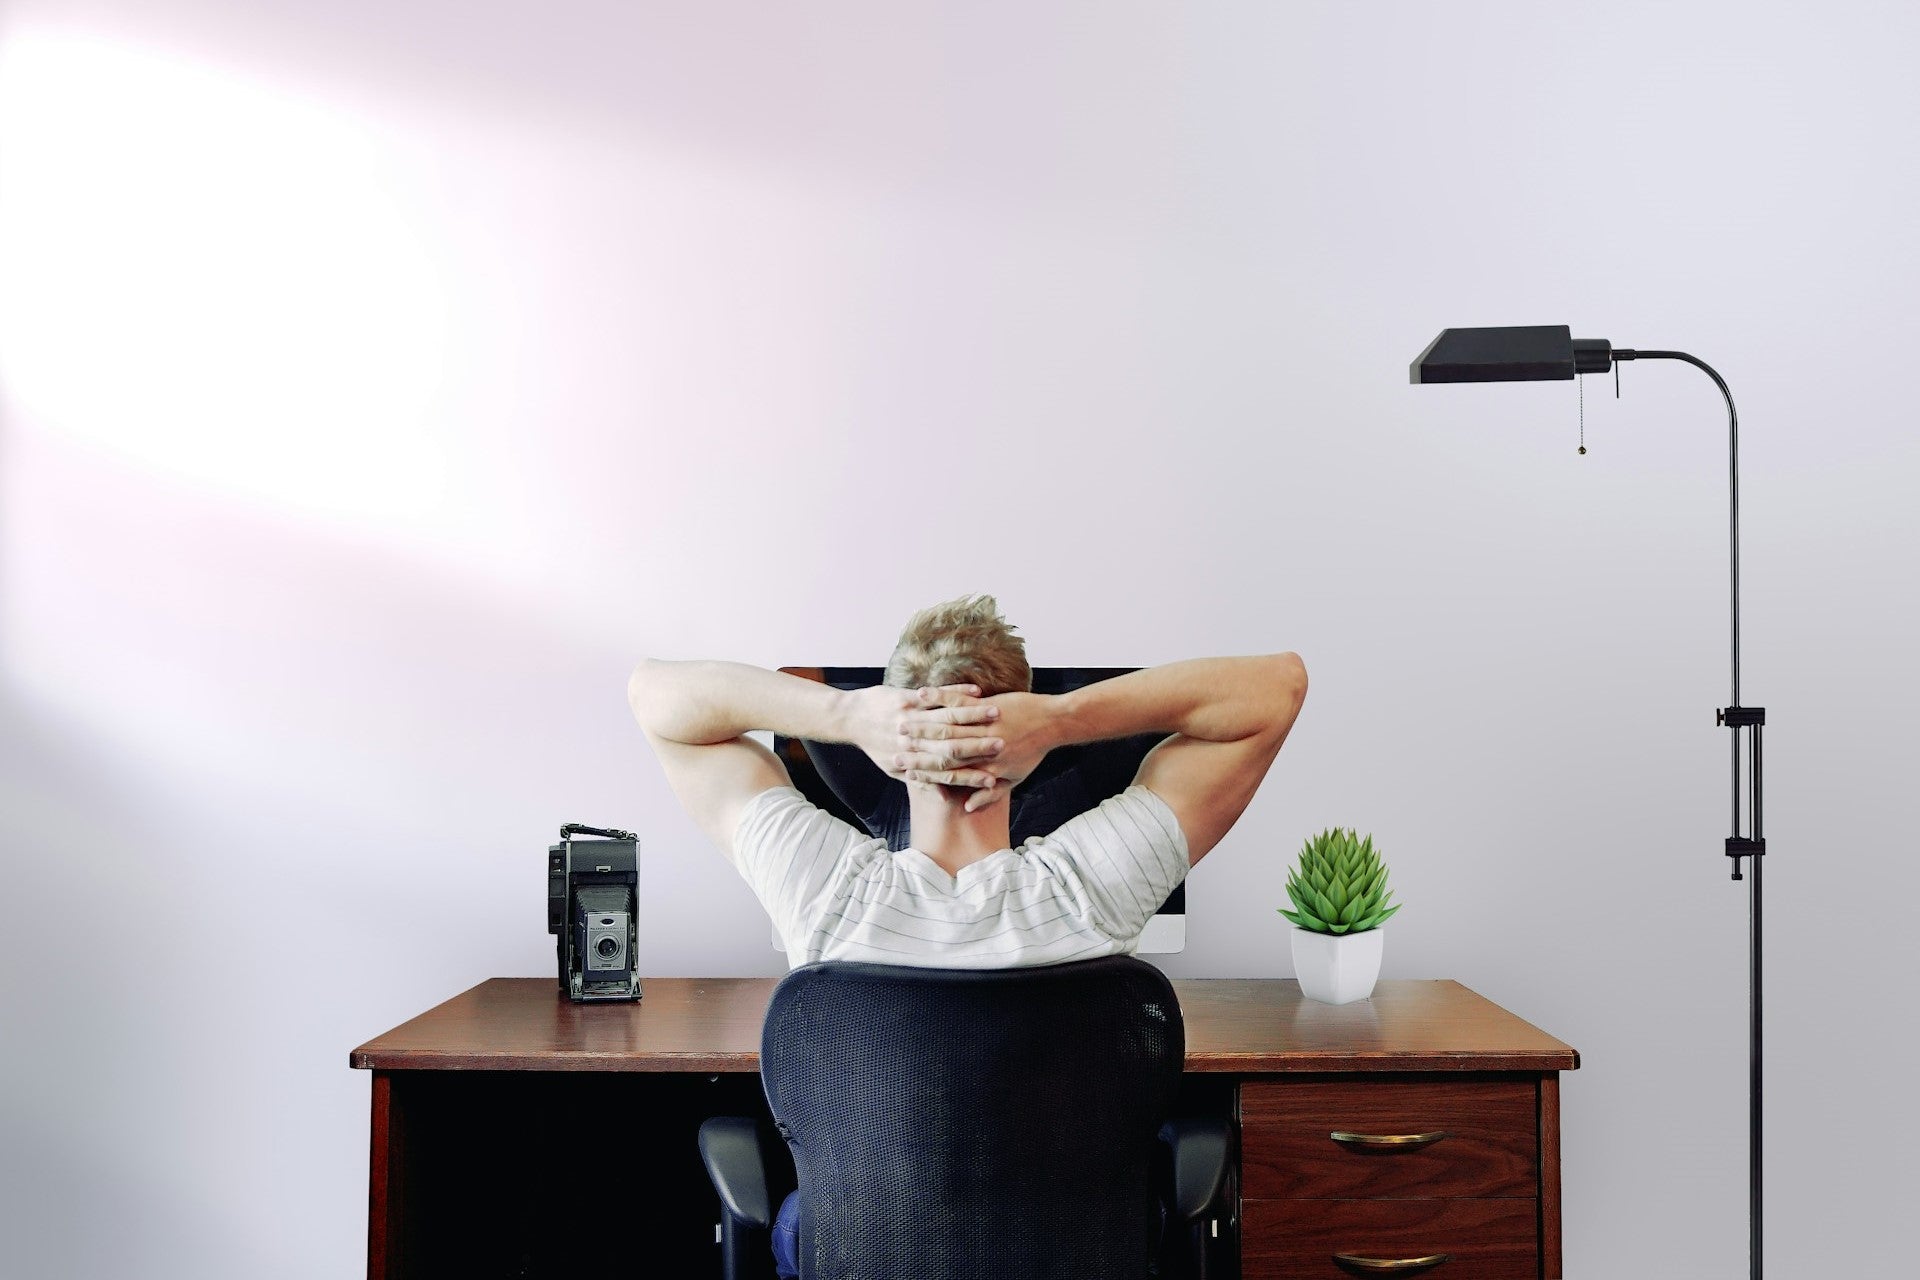 Work From Home? Here's How to Stop Back Pain From Sitting Too Long